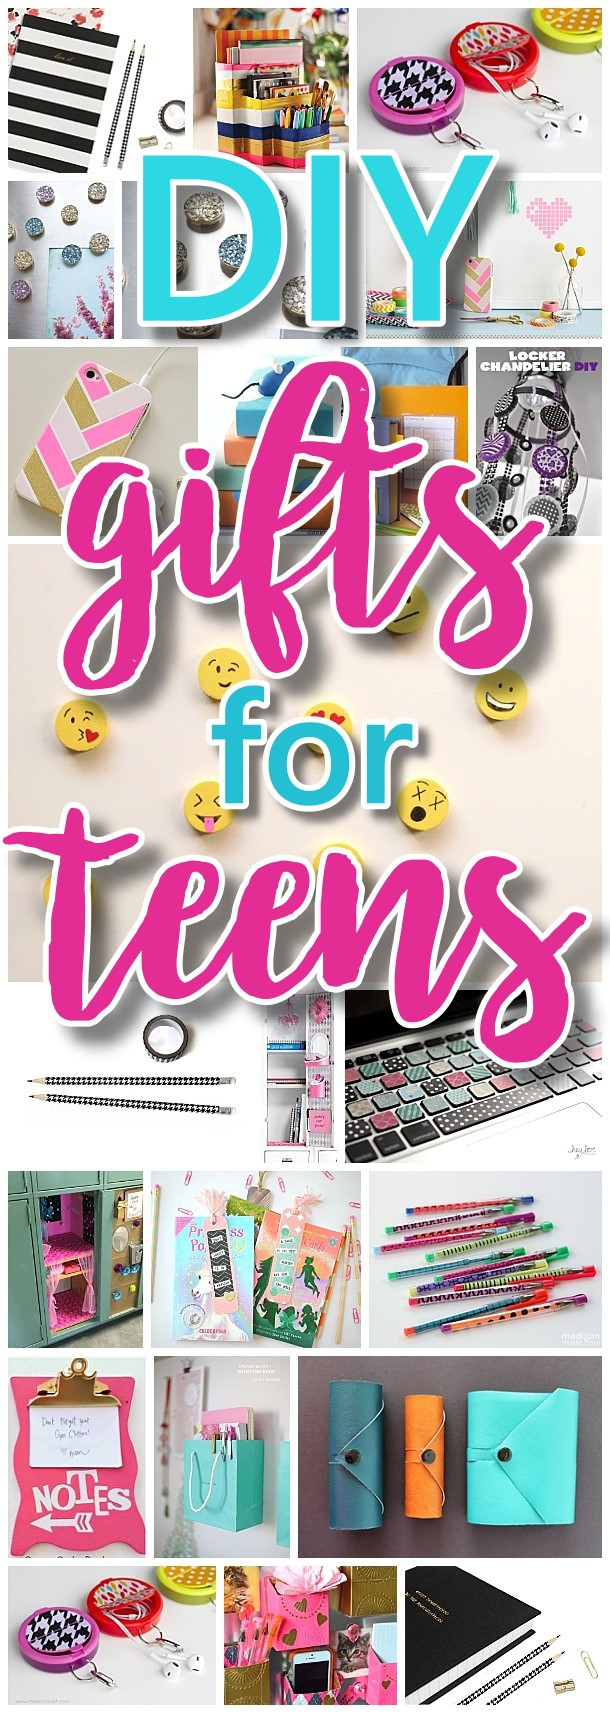 DIY Christmas Gift For Best Friend
 The BEST DIY Gifts for Teens Tweens and Best Friends